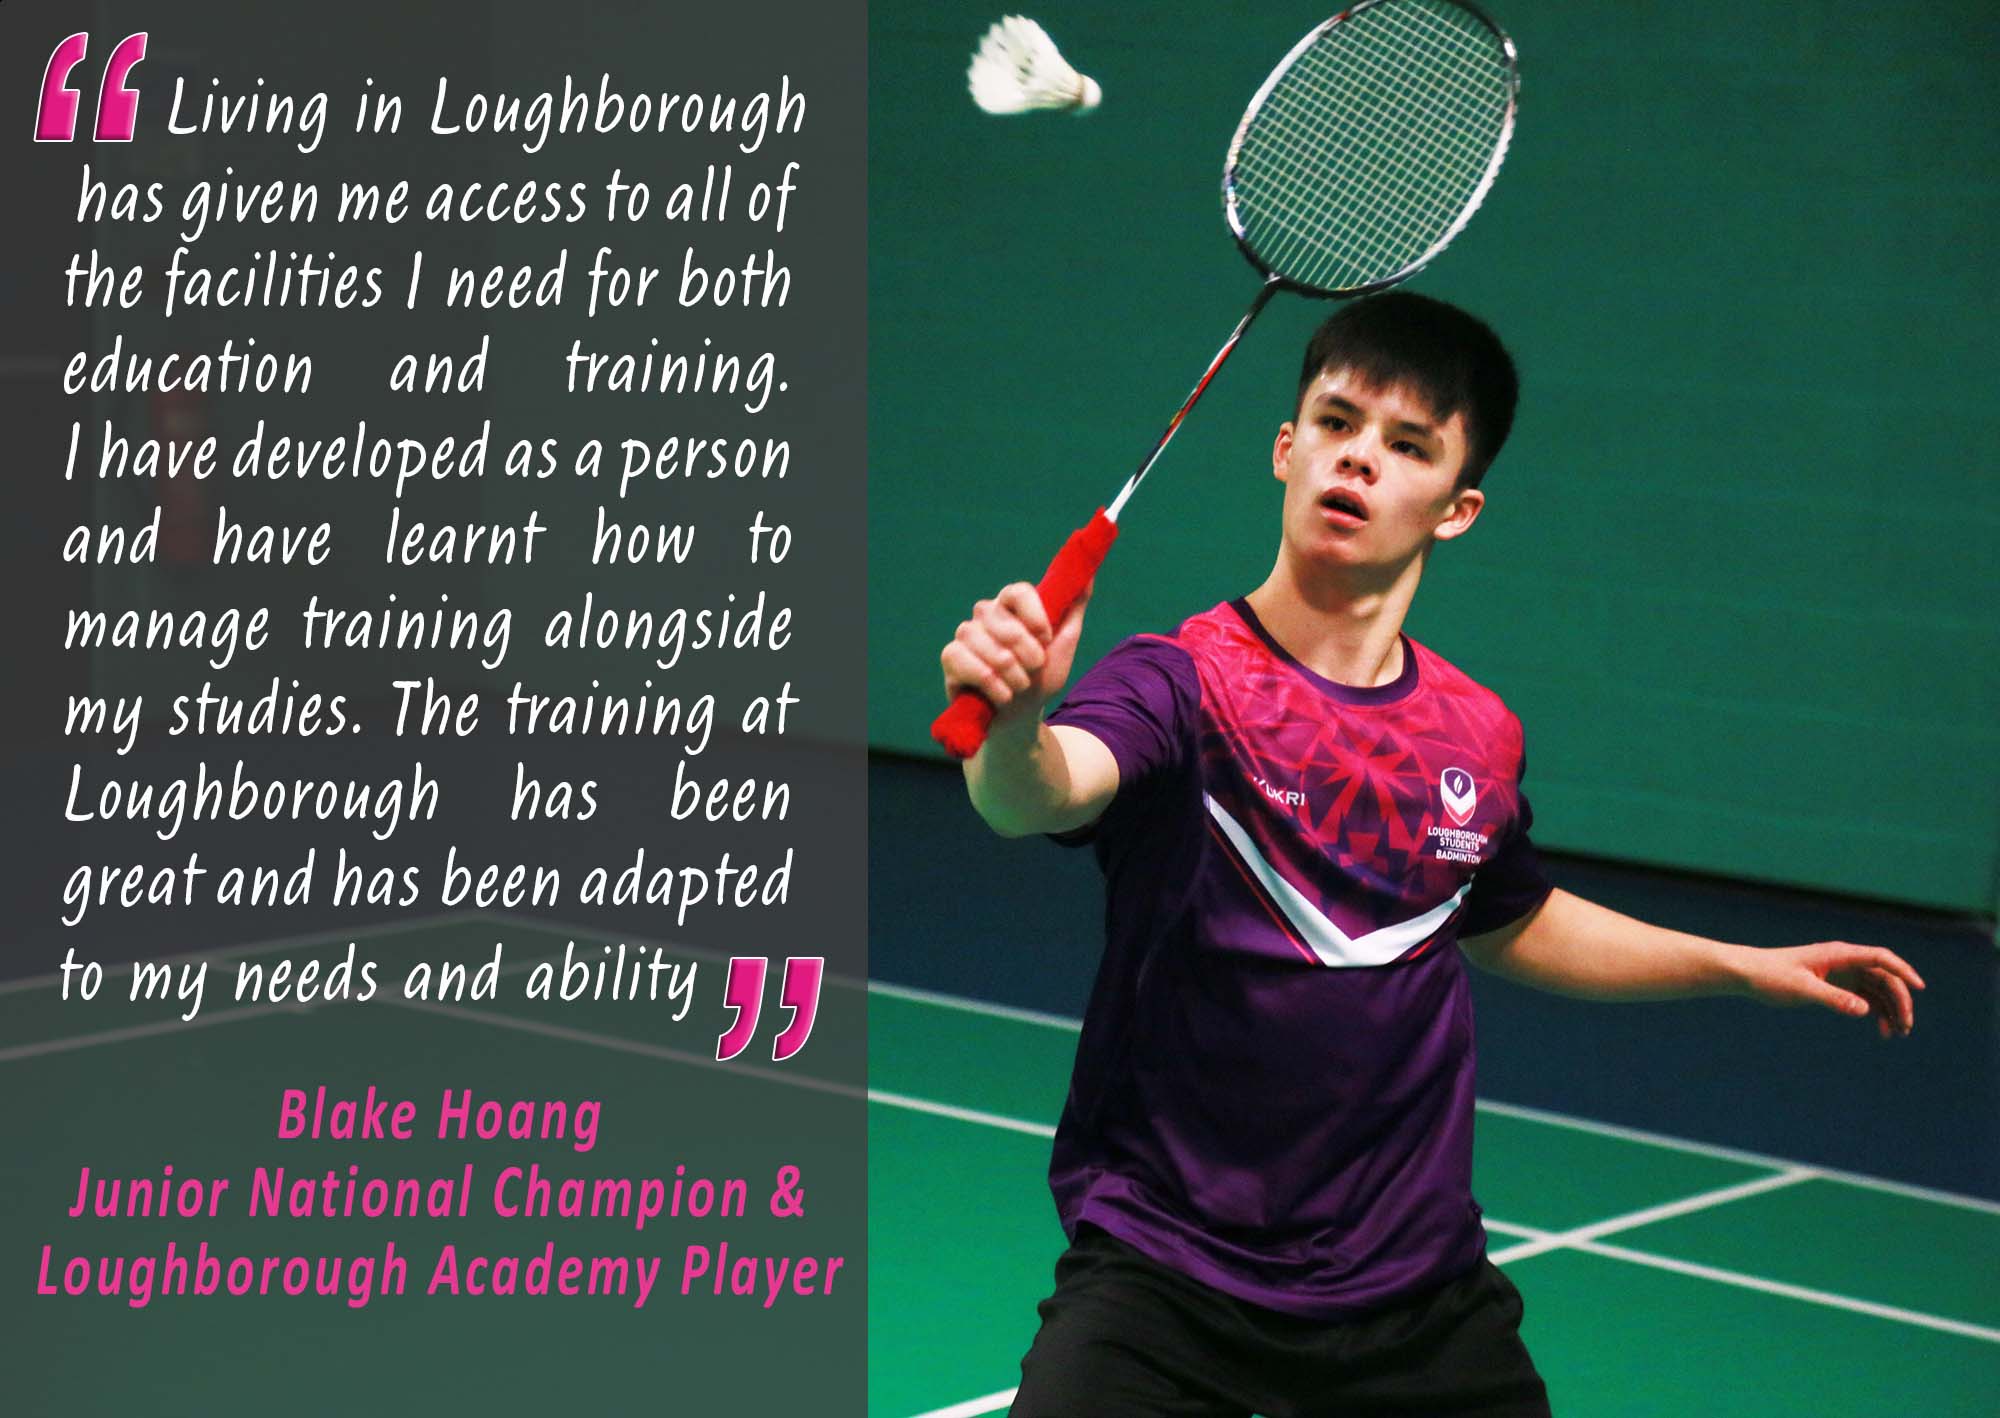 Photo of Blake Hoang and text: “Living in Loughborough has given me access to all of the facilities I need for both education and training. I have developed as a person and have learnt how to manage training alongside my studies. The training at Loughborough has been great and has been adapted to my needs and ability” Blake Hoang, Junior National Champion and Loughborough Academy Player.